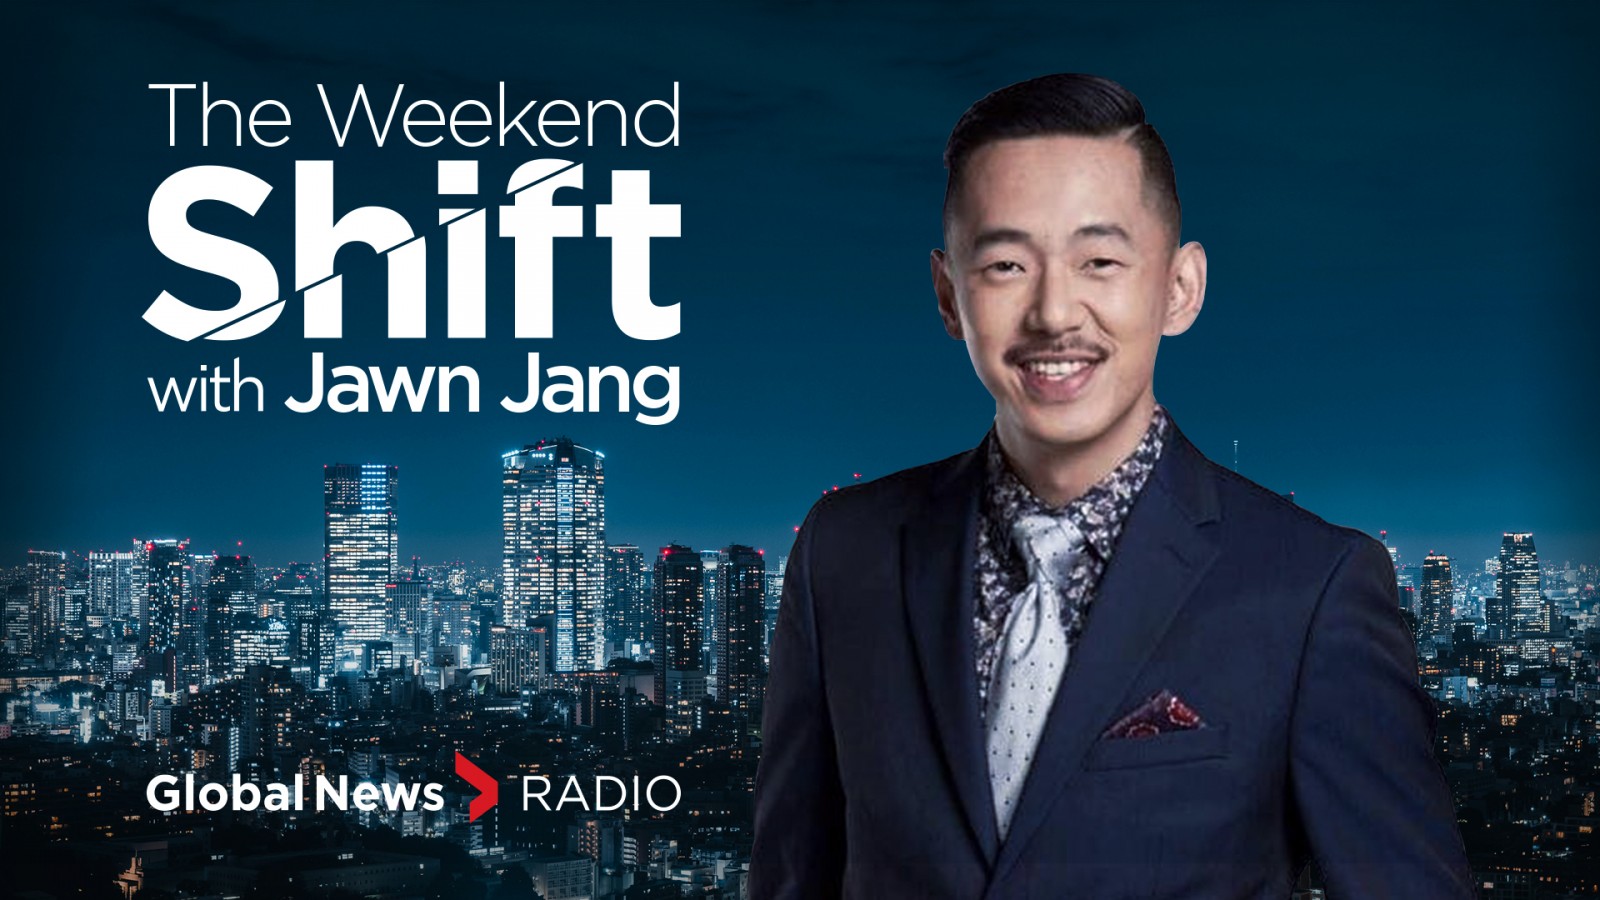 The Weekend Shift with Jawn Jang